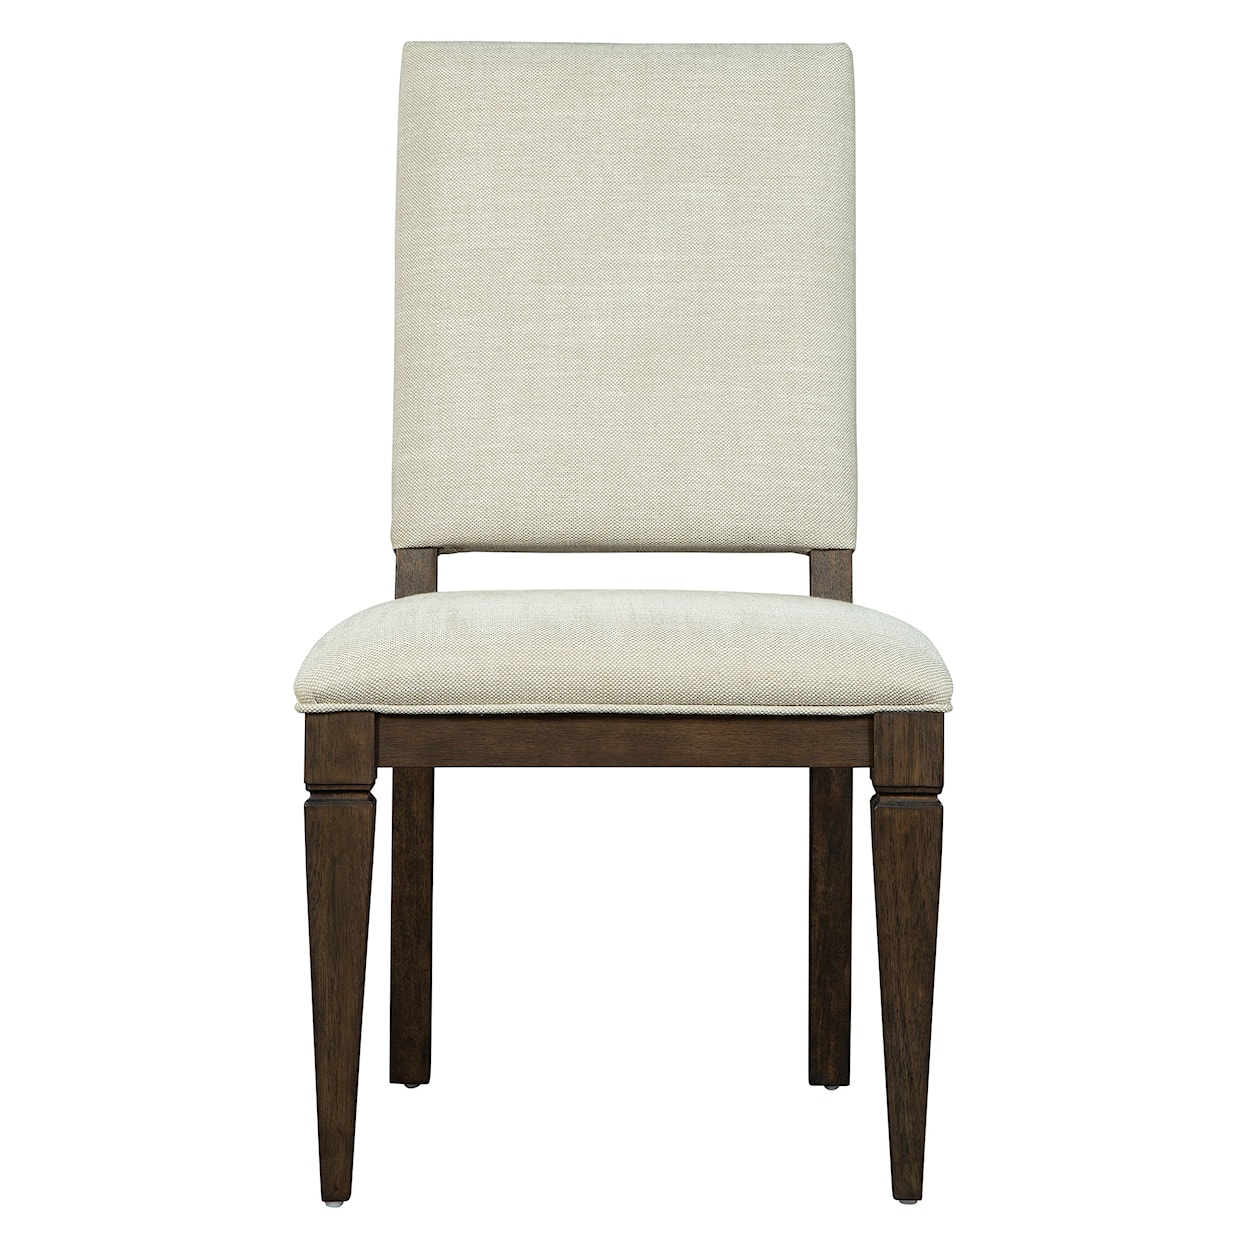 Hekman Linwood Dining Side Chair